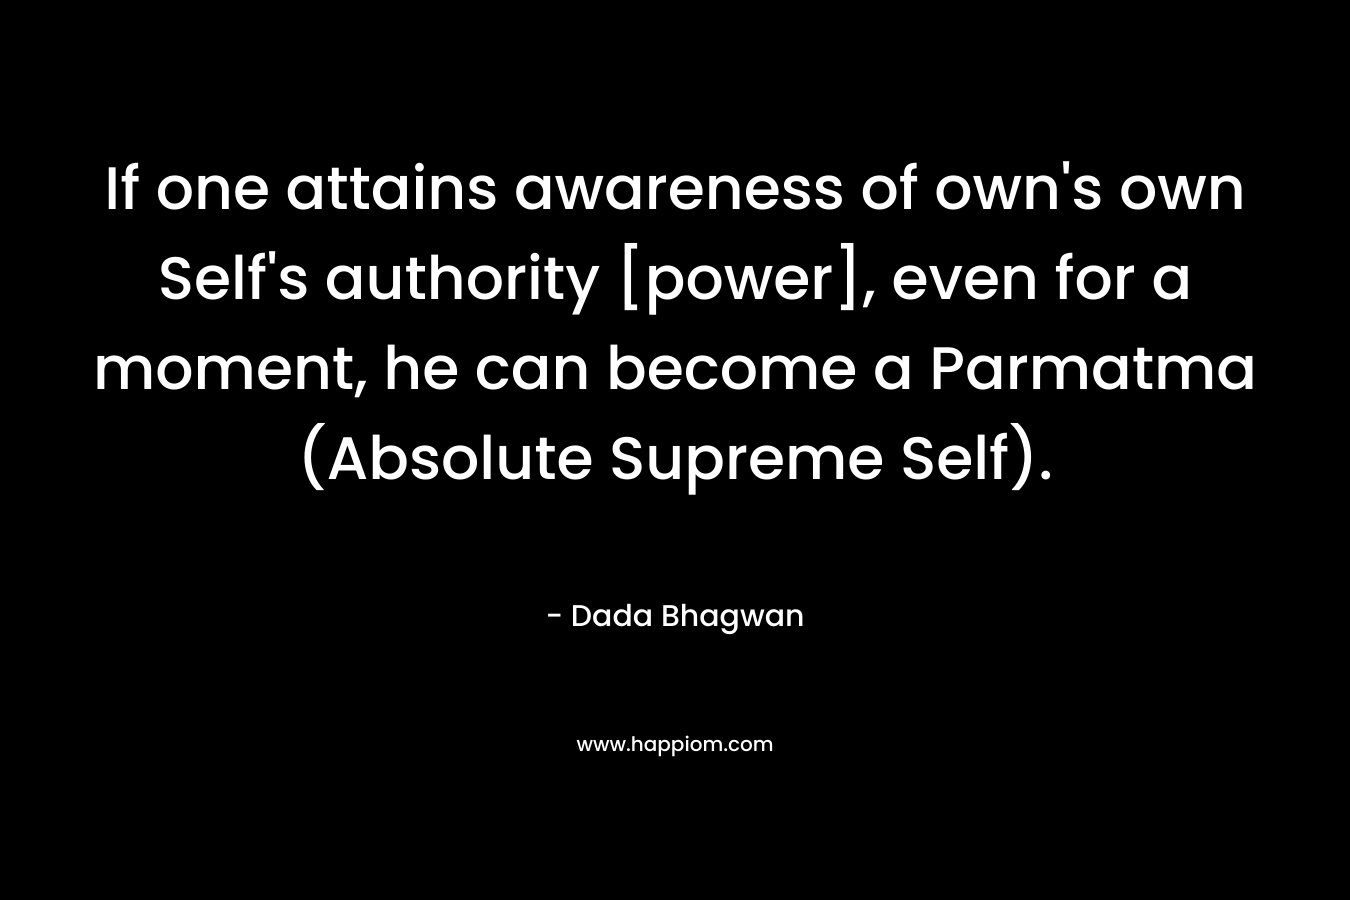 If one attains awareness of own’s own Self’s authority [power], even for a moment, he can become a Parmatma (Absolute Supreme Self). – Dada Bhagwan